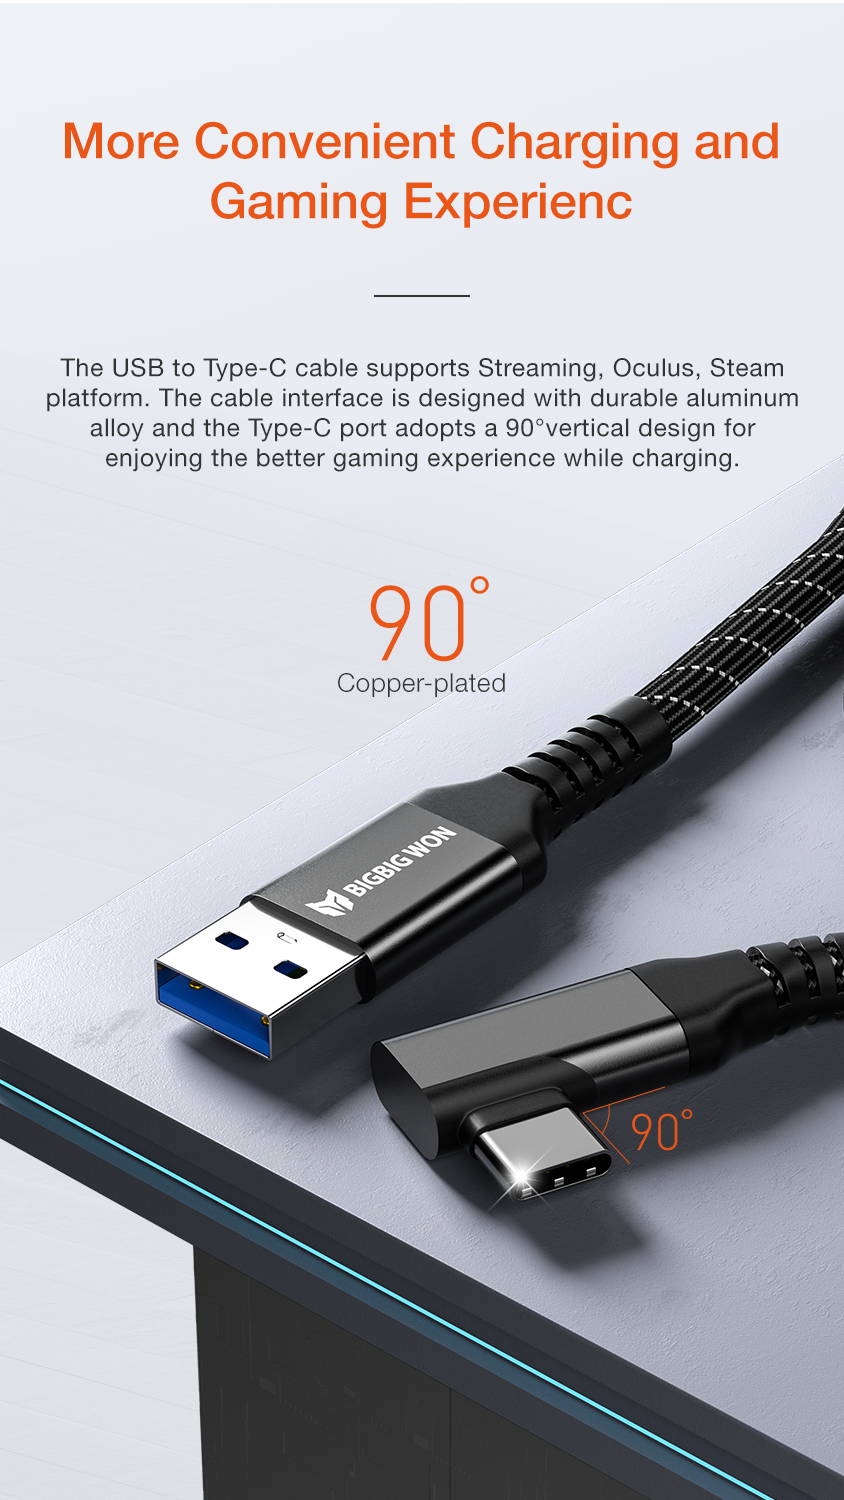 bigbig won usb 3.2 usb c type c link cable 90° copper-plated for more convenient charging and gaming